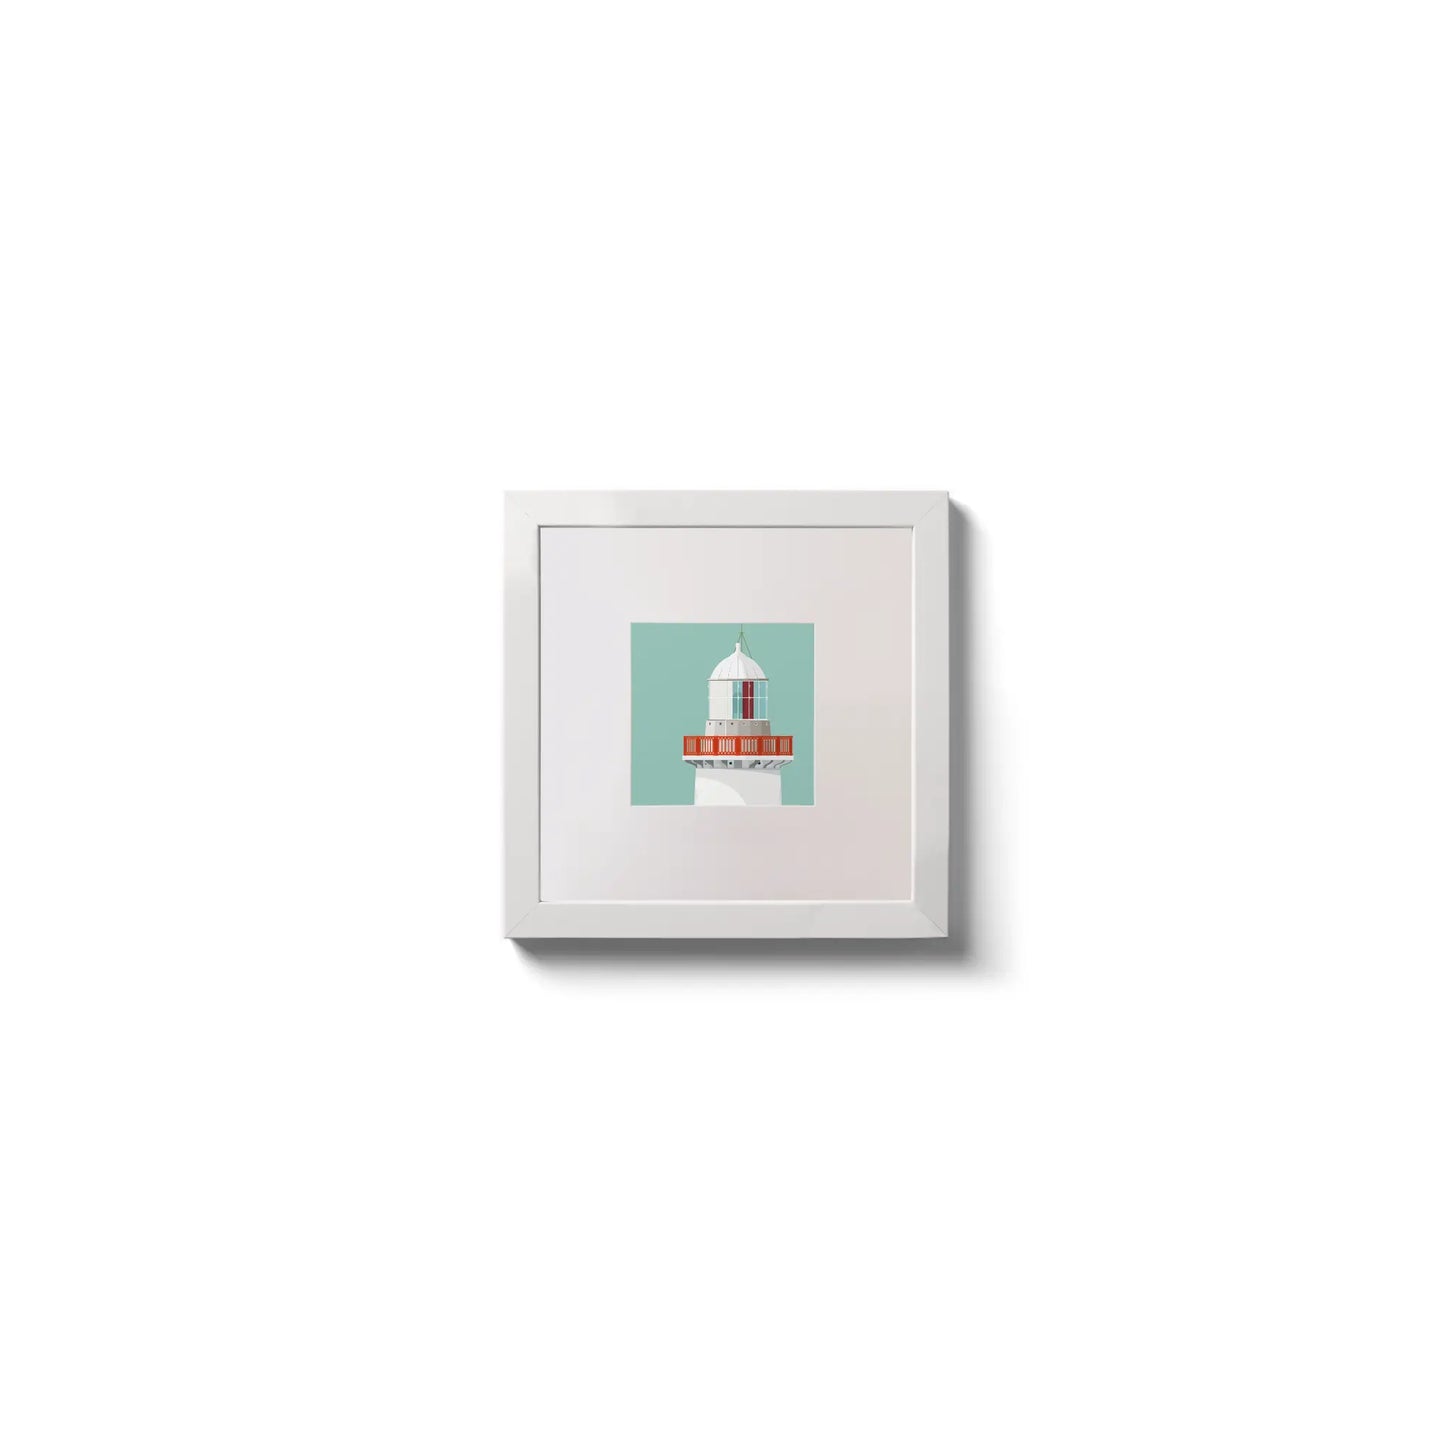 Illustration of Ballinacourty lighthouse on an ocean green background,  in a white square frame measuring 10x10cm.